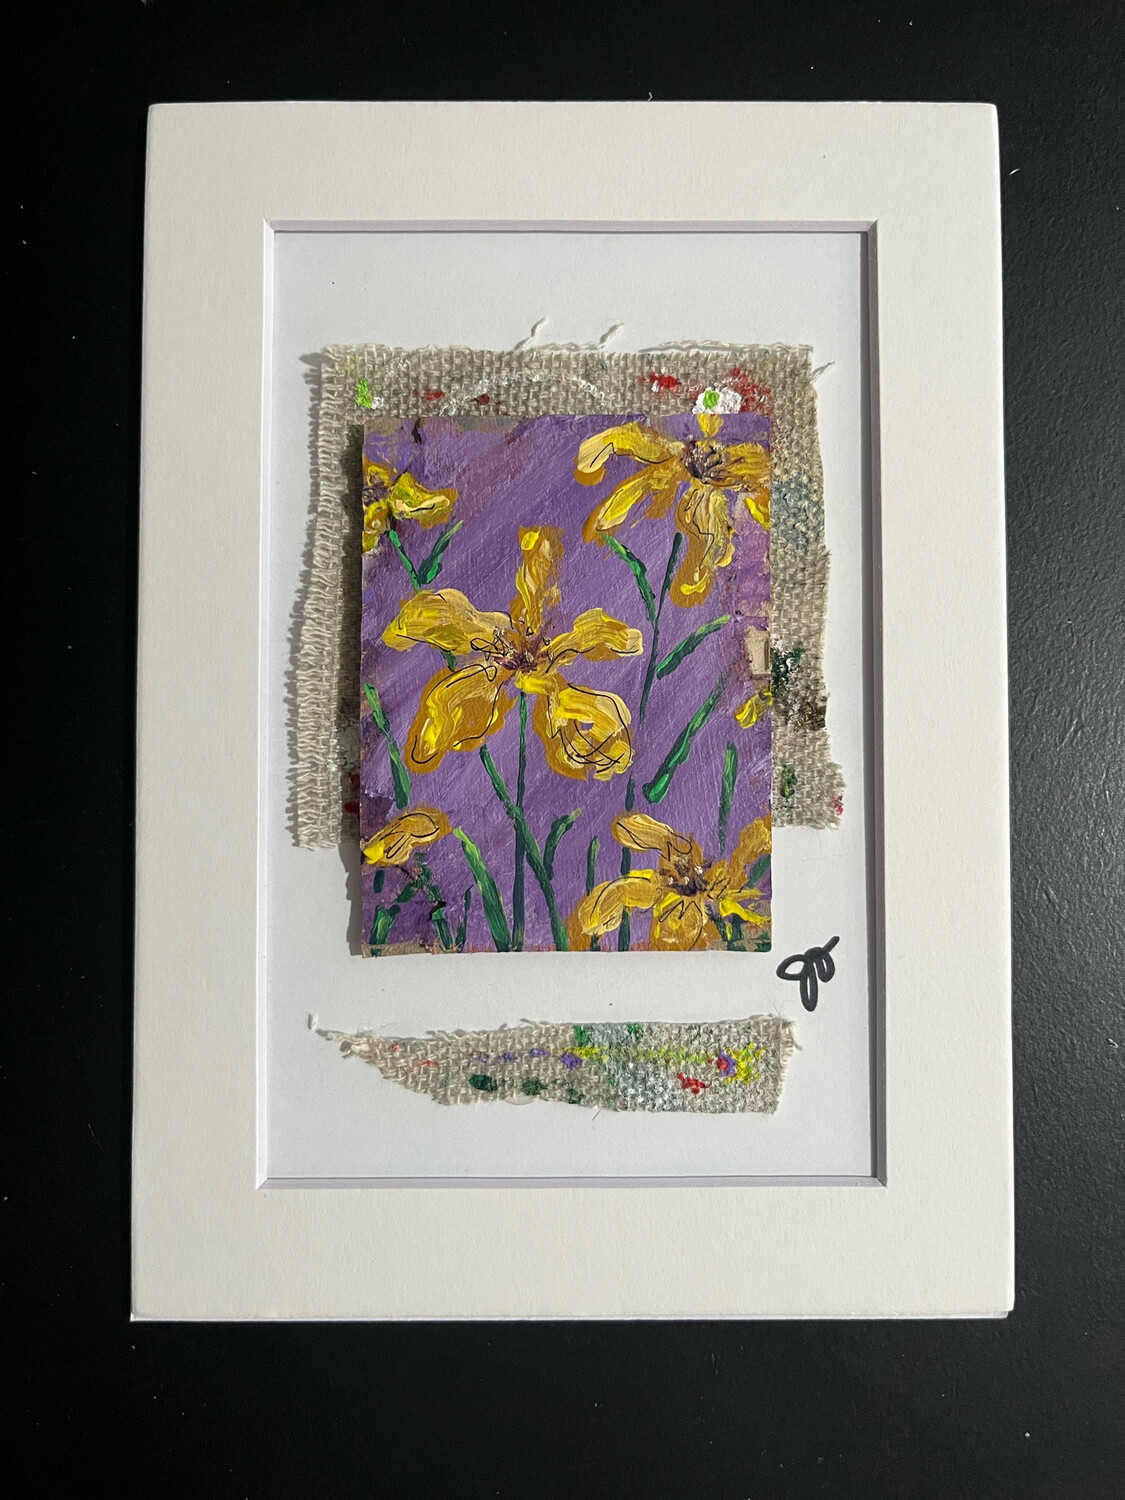 Yellows In Bloom (5x7)